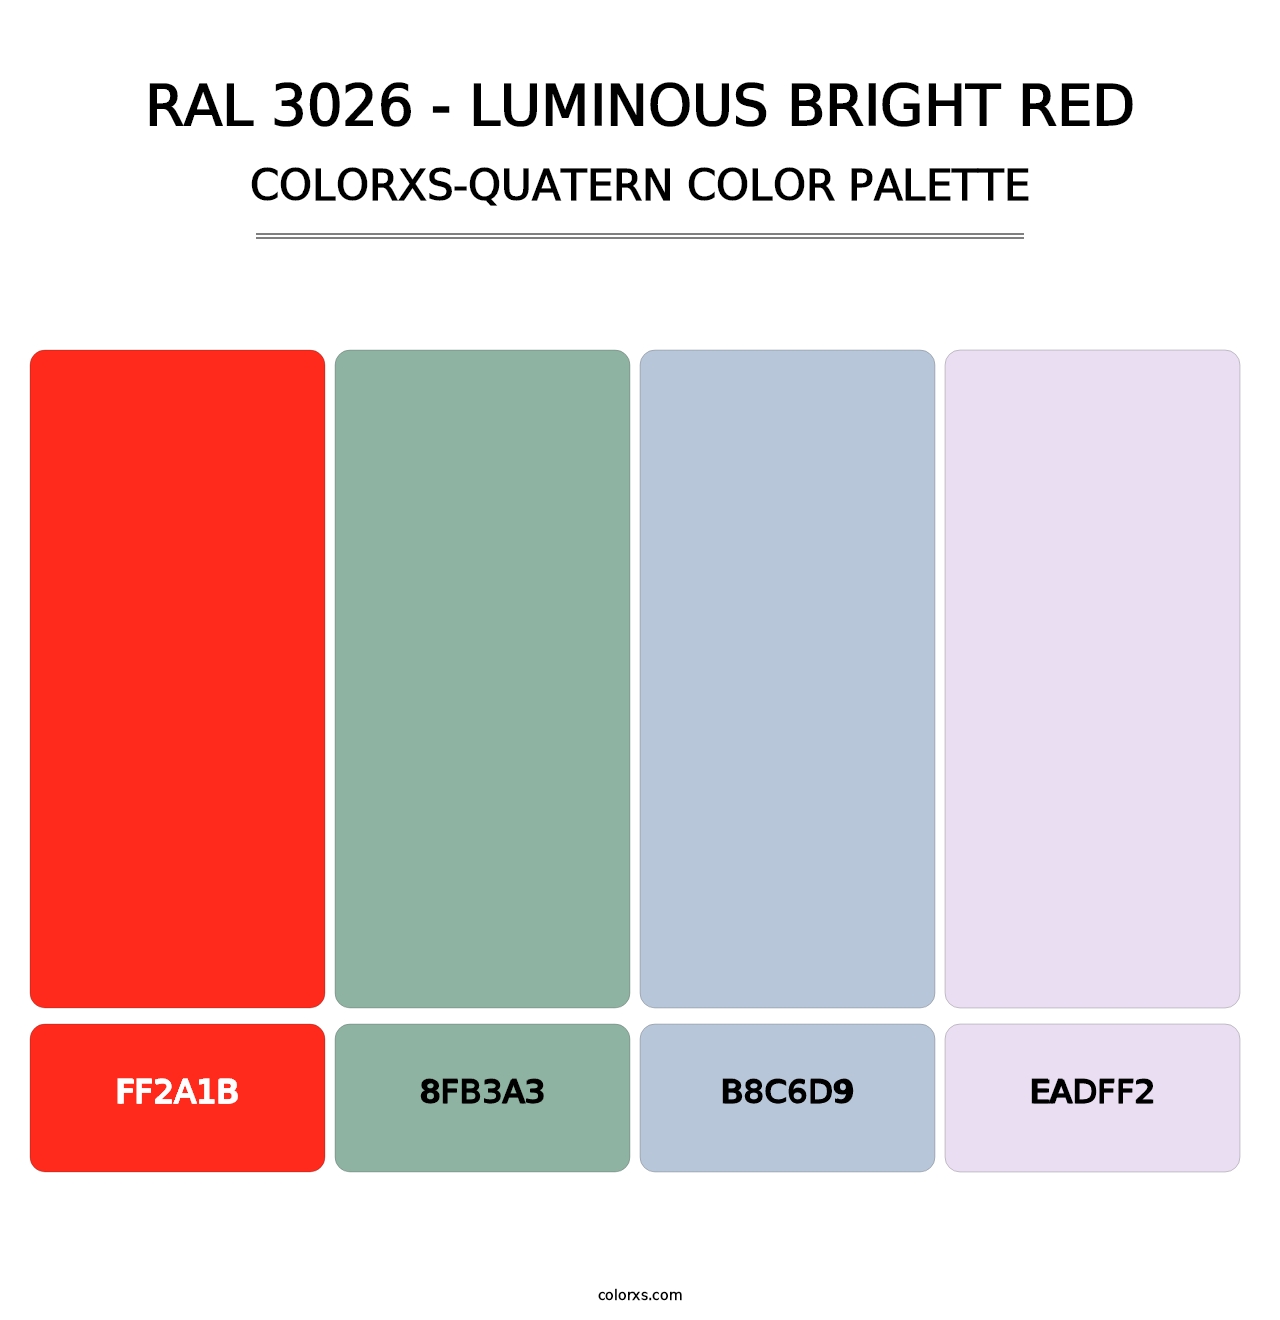 RAL 3026 - Luminous Bright Red - Colorxs Quatern Palette